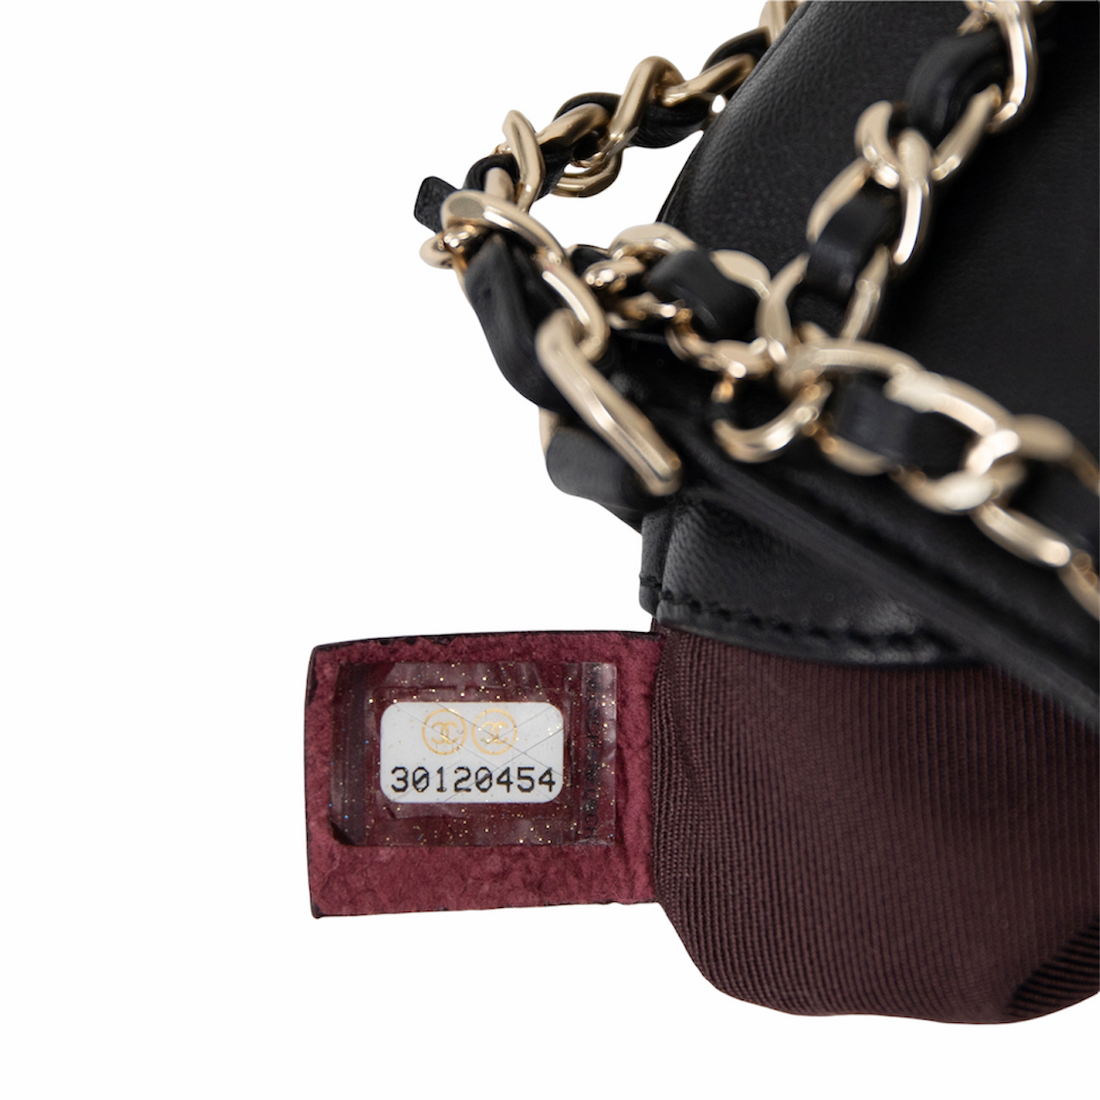 Chanel Black Leather & Chain-Link Phone Bag